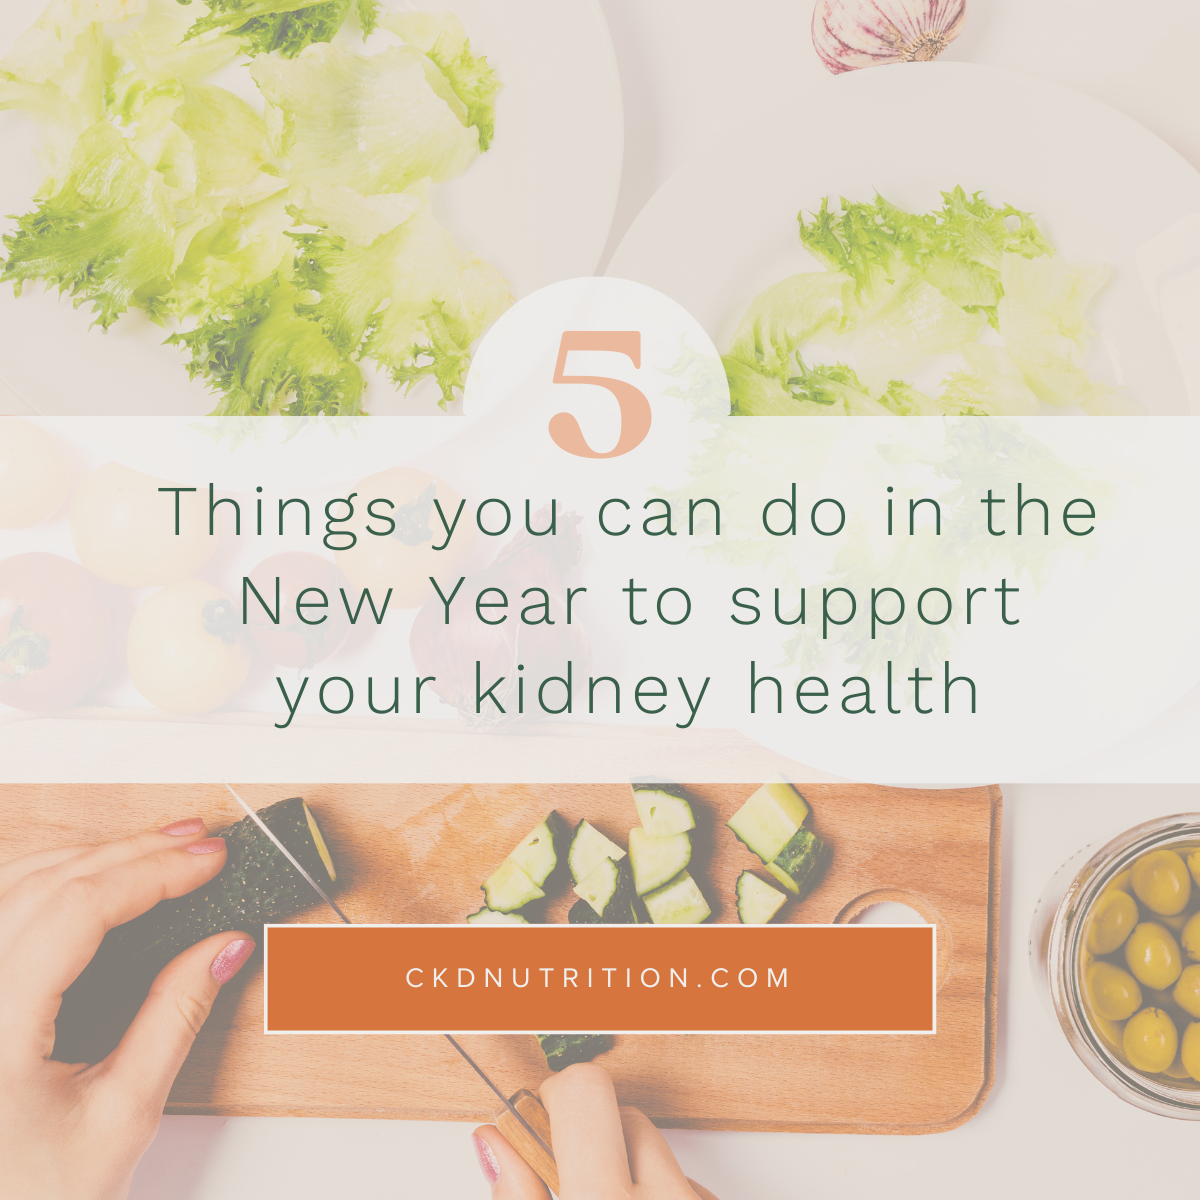 Picture of food being cut with wording "5 things you can do in the New Year to support your kidney health"